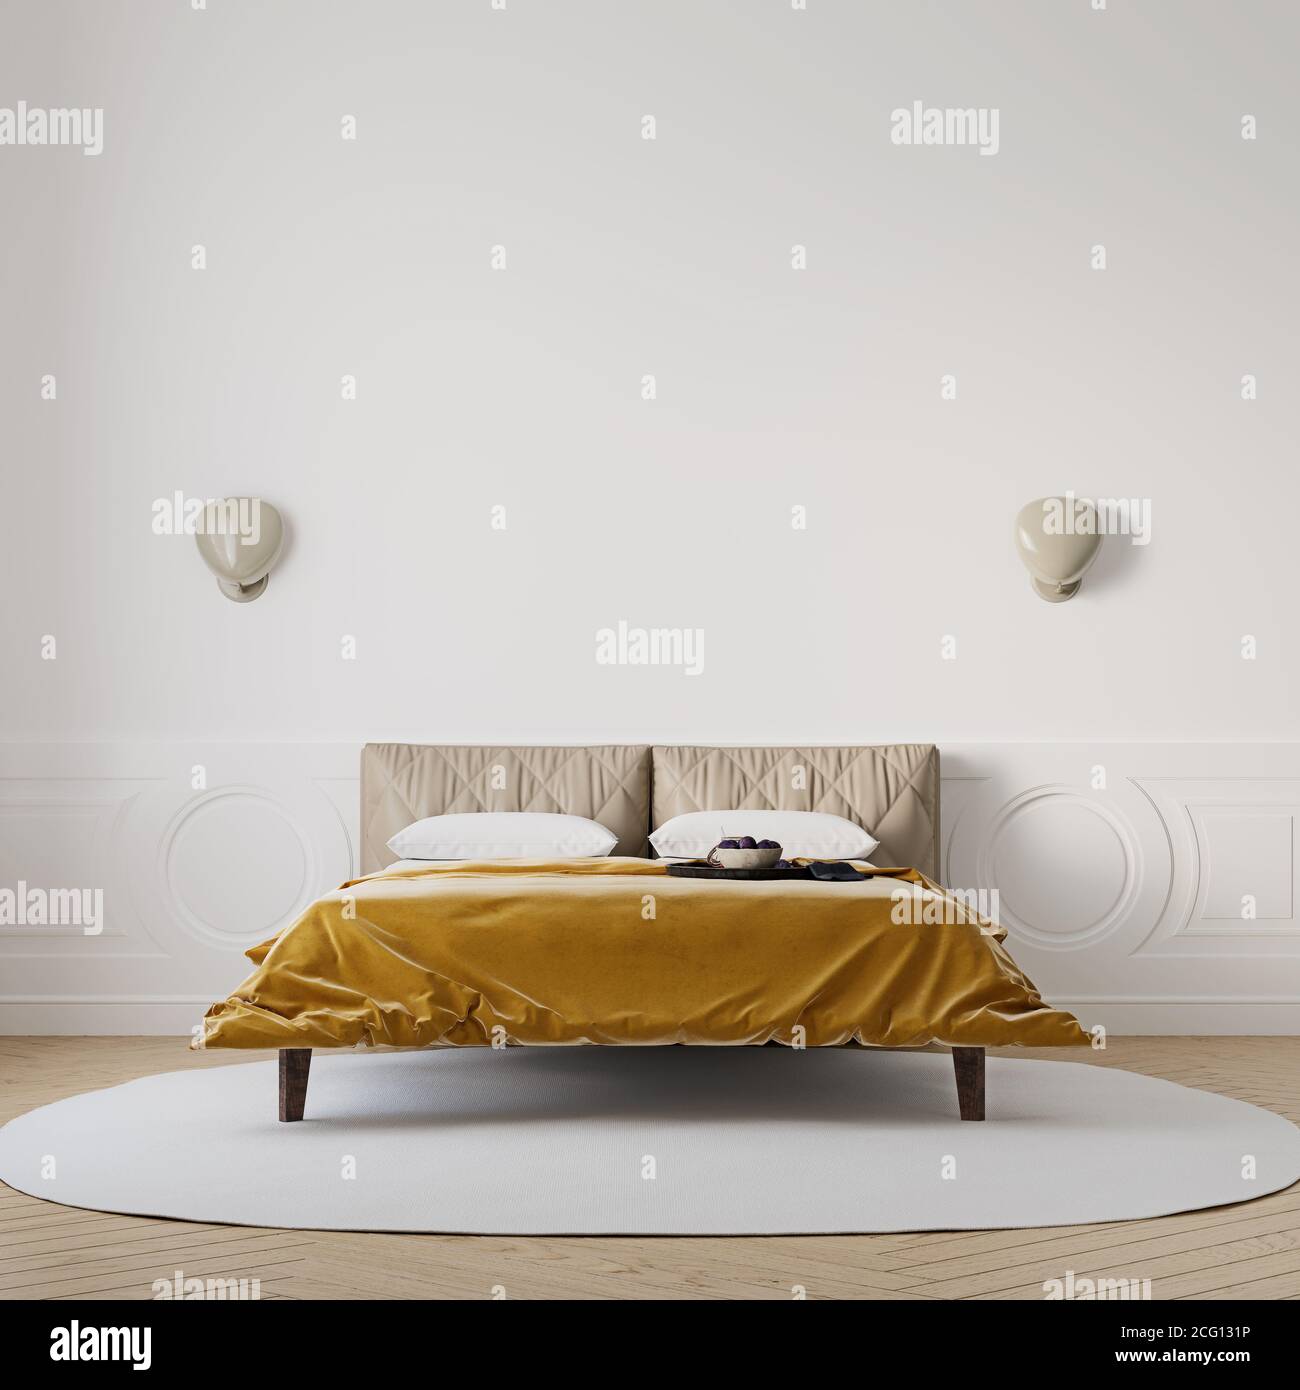 Brightly lit bedroom with vibrant gold color bedspread, mock-up with negative space, 3d render, 3d illustration Stock Photo